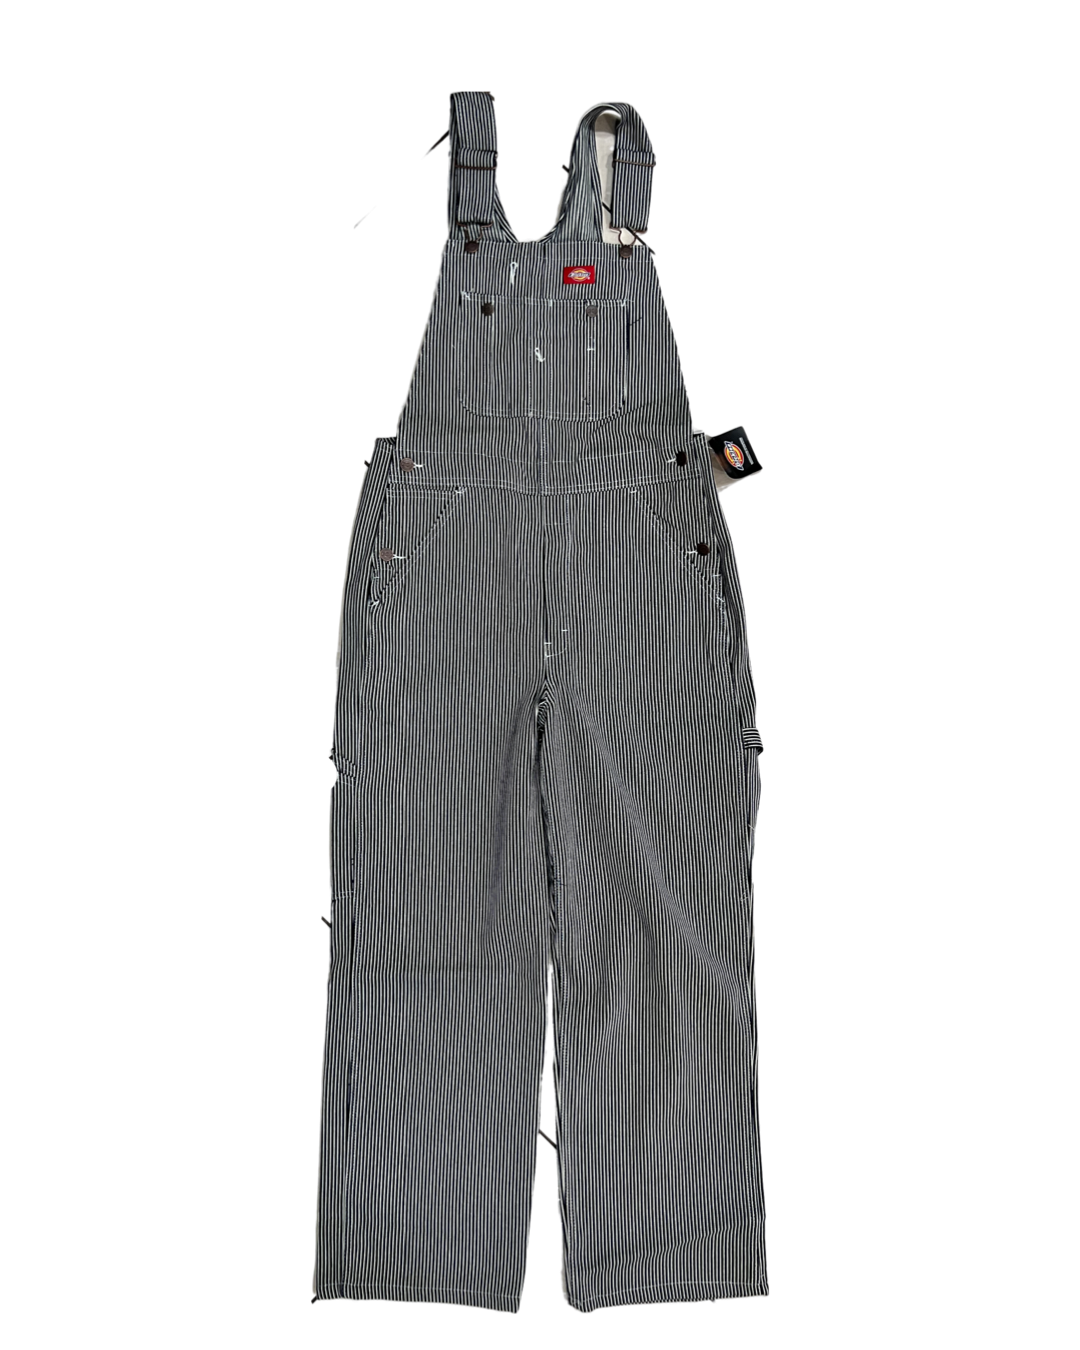 Black & White Striped Dickies Overall